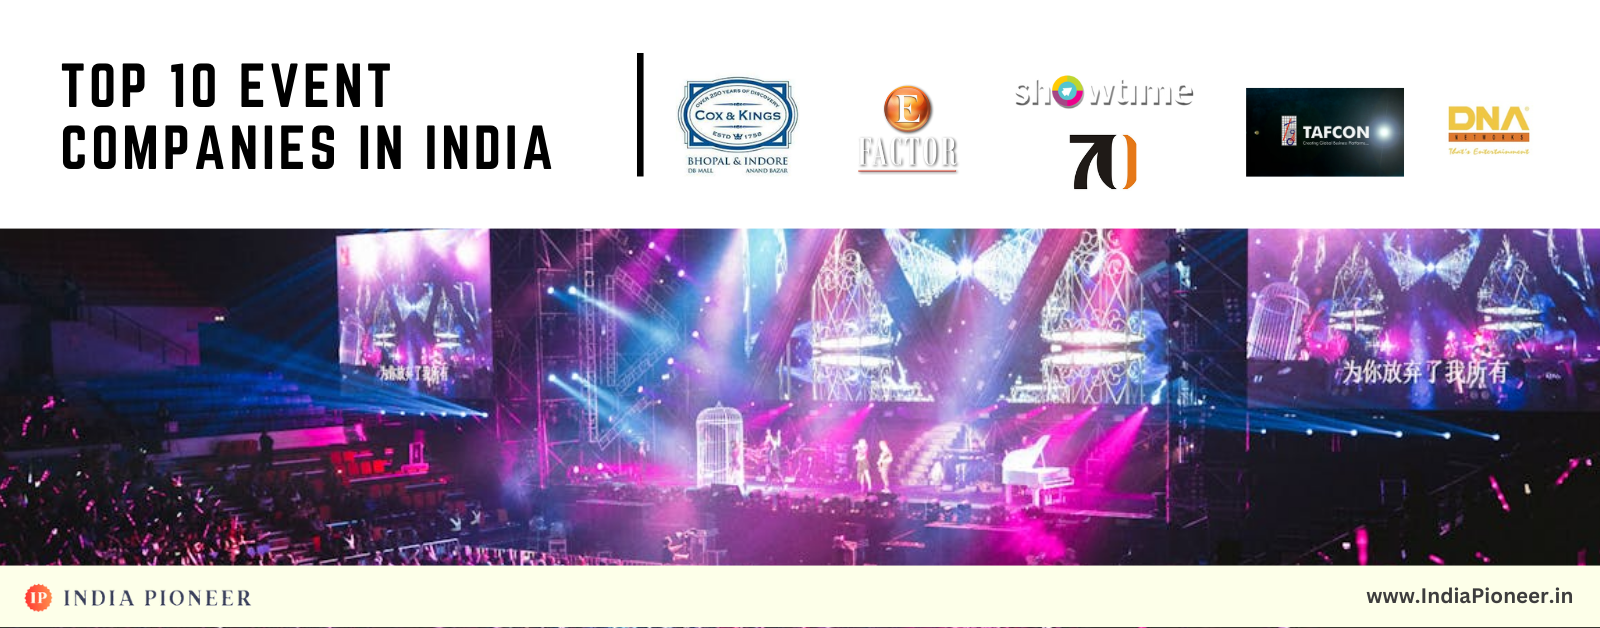 Top 10 Event Companies in India